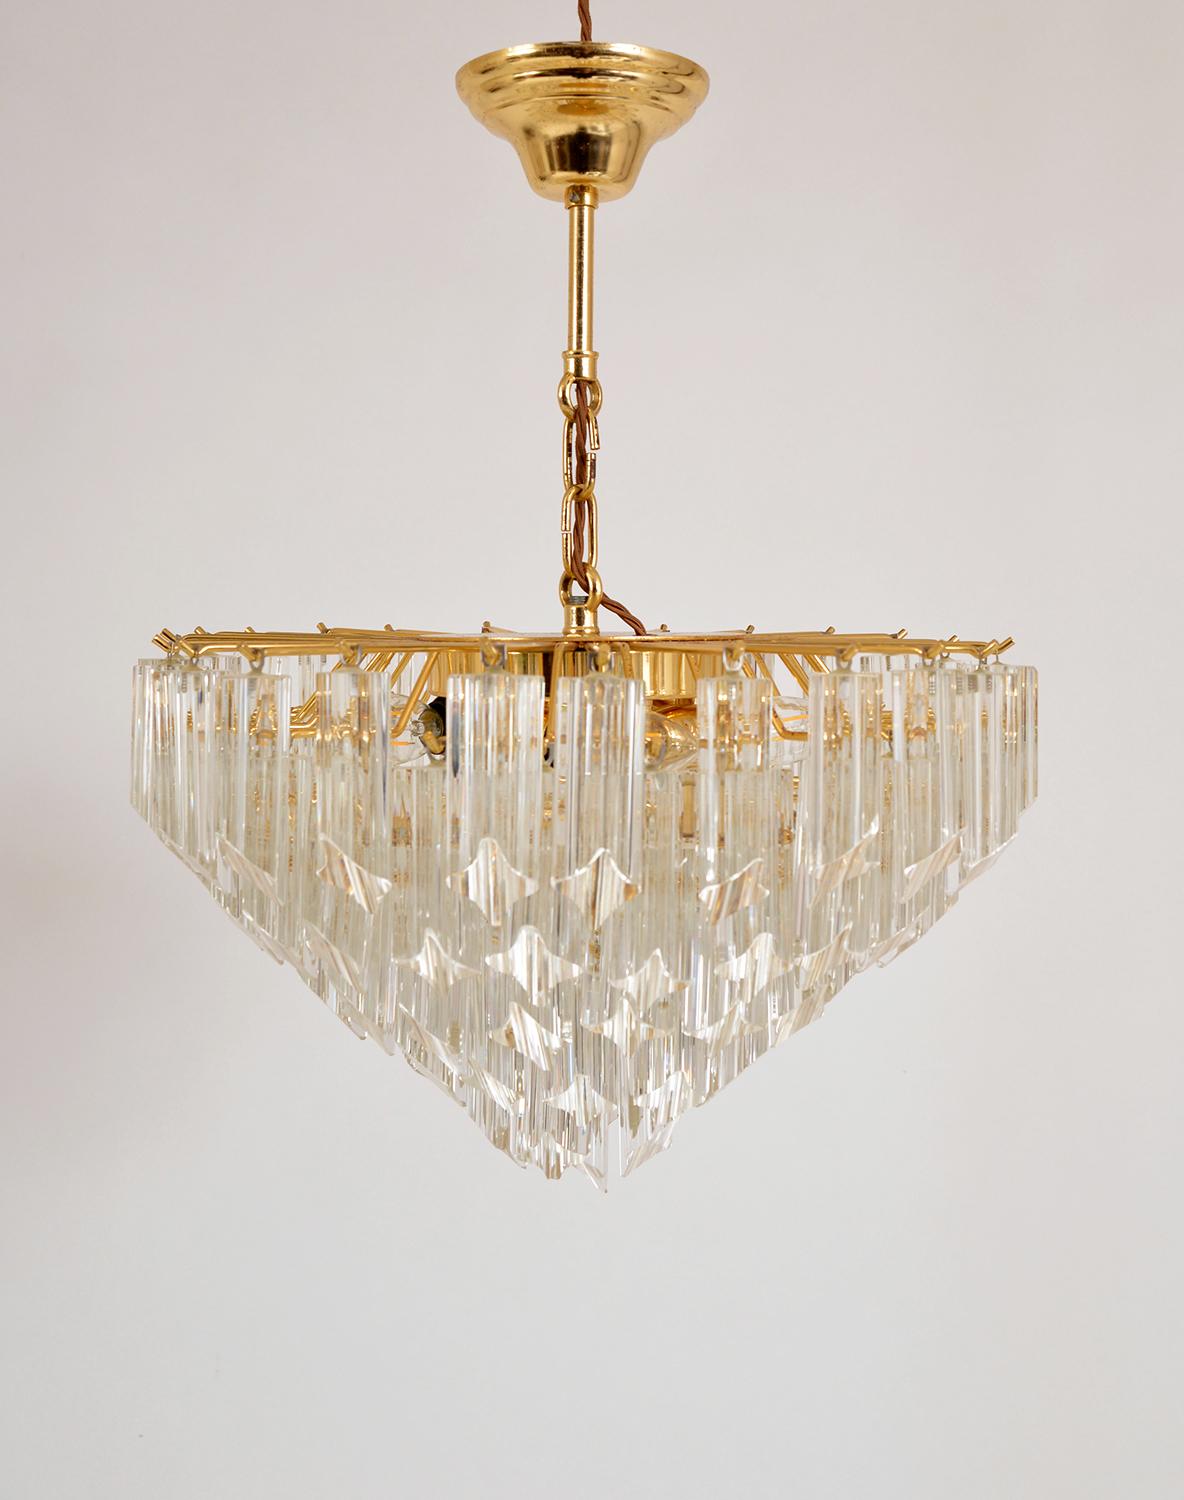 Stunning 1970s Italian chandelier by Novaresi Luce Milano, with clear Murano glass cut drops in the Quadriedri technique, arranged in descending layers from a 24 carat gilded brass frame with four bulbs. 
There are a couple of small nibbles on a